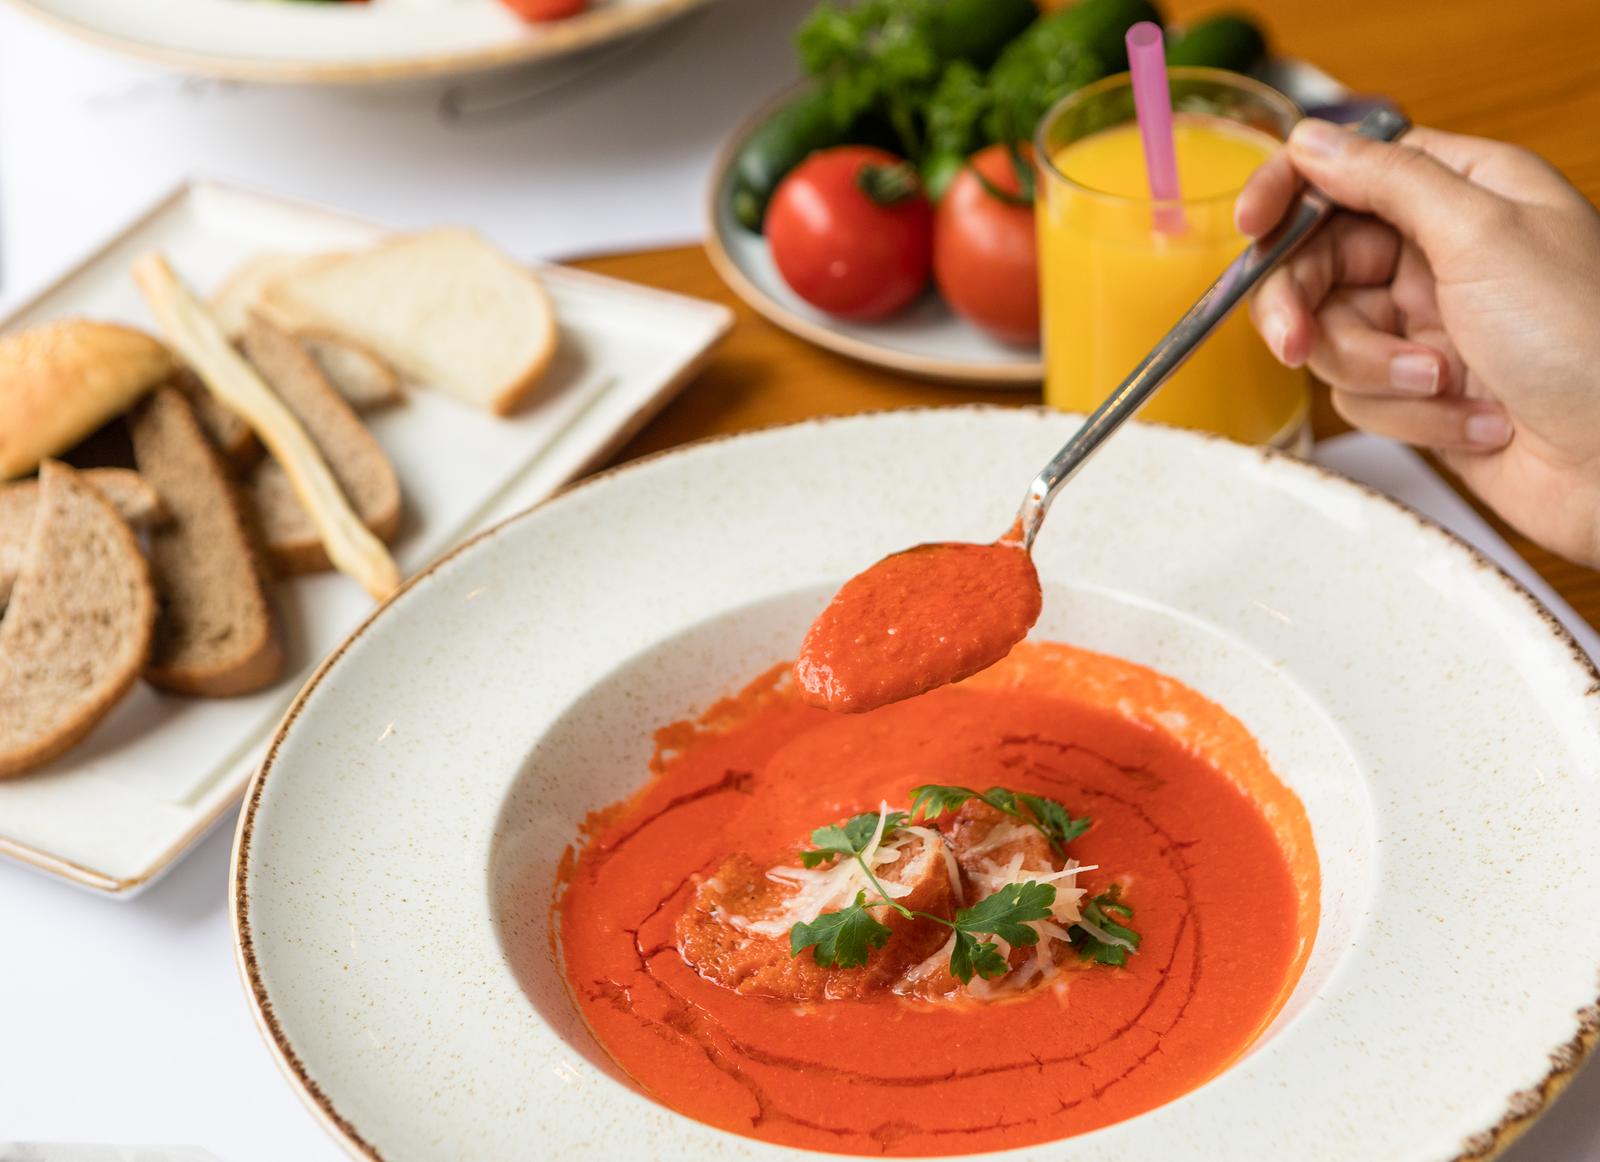 Eat at a Global Food Extravaganza to Determine the Season That Best Represents You Gazpacho